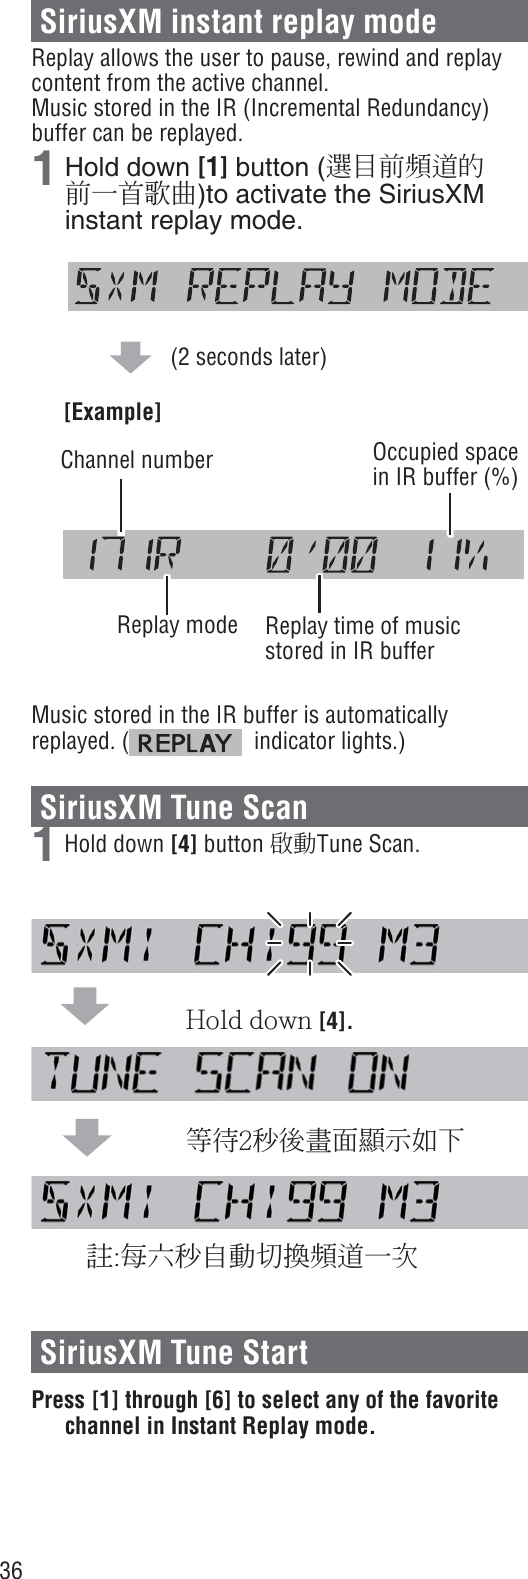 36SiriusXM instant replay modeReplay allows the user to pause, rewind and replay content from the active channel.Music stored in the IR (Incremental Redundancy) buffer can be replayed.1 Hold down [1] button (選目前頻道的前一首歌曲)to activate the SiriusXM instant replay mode.(2 seconds later)[Example]Occupied space in IR buffer (%)Replay modeChannel numberReplay time of music stored in IR bufferMusic stored in the IR buffer is automatically replayed. (   indicator lights.)SiriusXM Tune Scan1 Hold down [4] button 啟動Tune Scan.                     Hold down [4].                     等待2秒後畫面顯示如下註:每六秒自動切換頻道一次SiriusXM Tune StartPress [1] through [6] to select any of the favorite channel in Instant Replay mode.